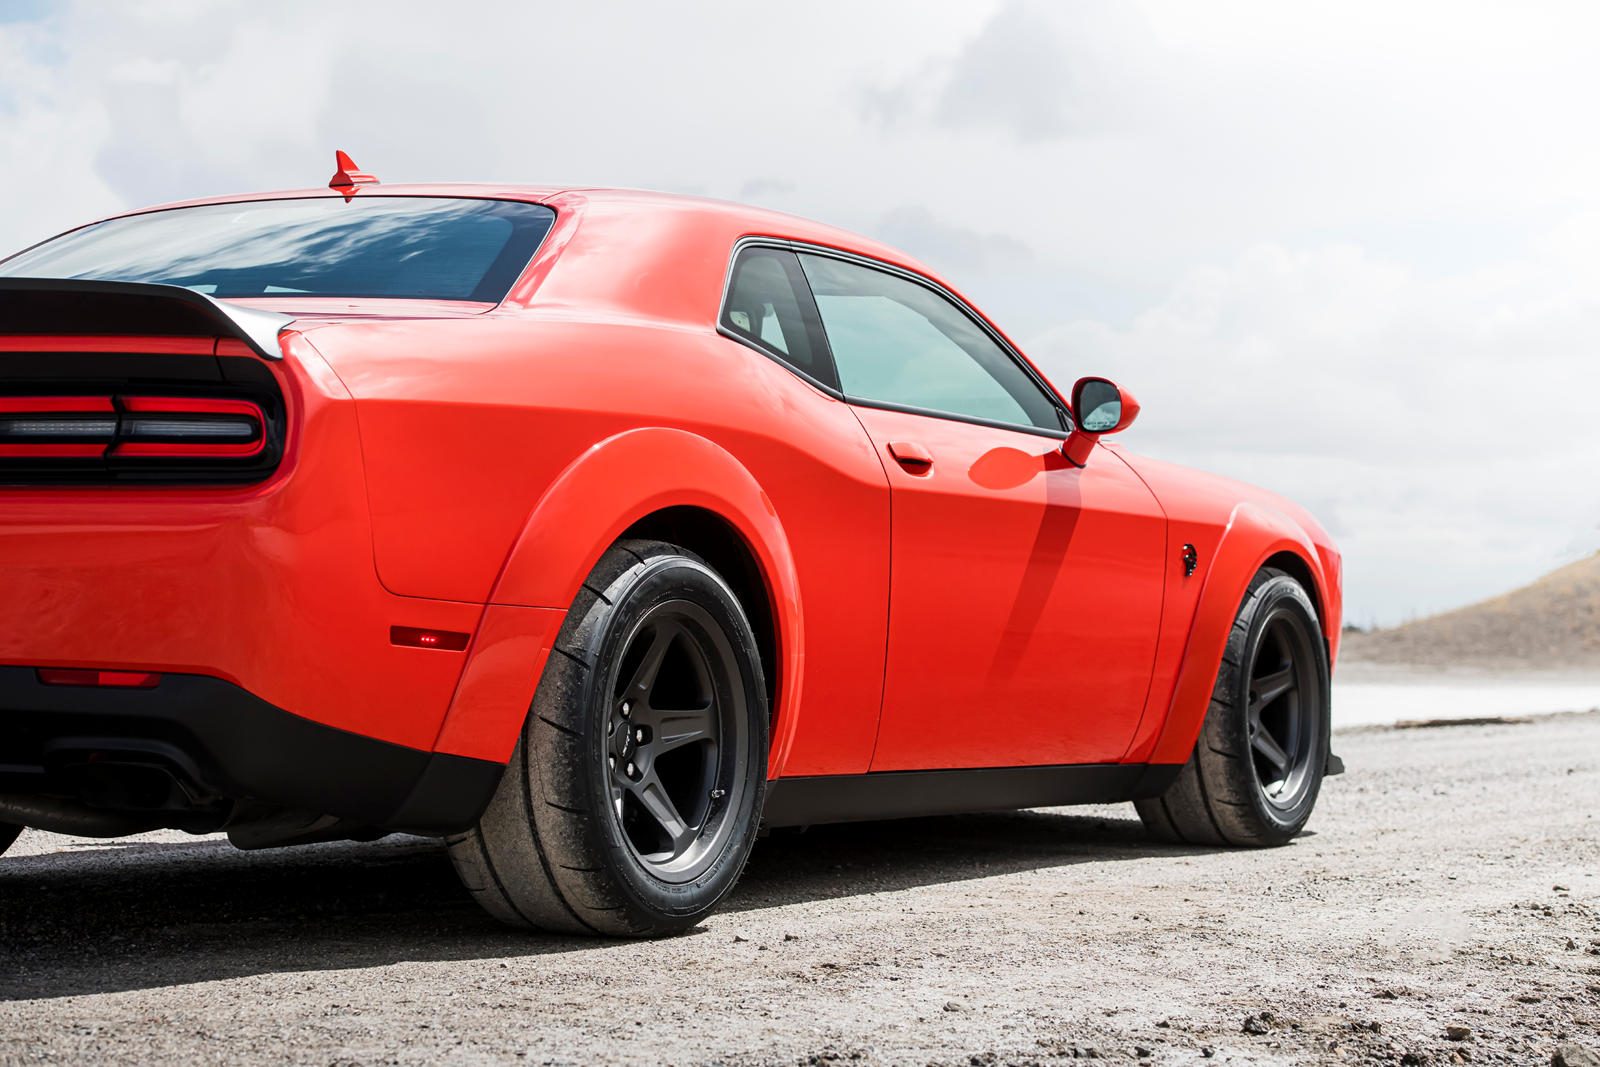 Say Hello To The 2020 Dodge Challenger SRT Super Stock World's Fastest